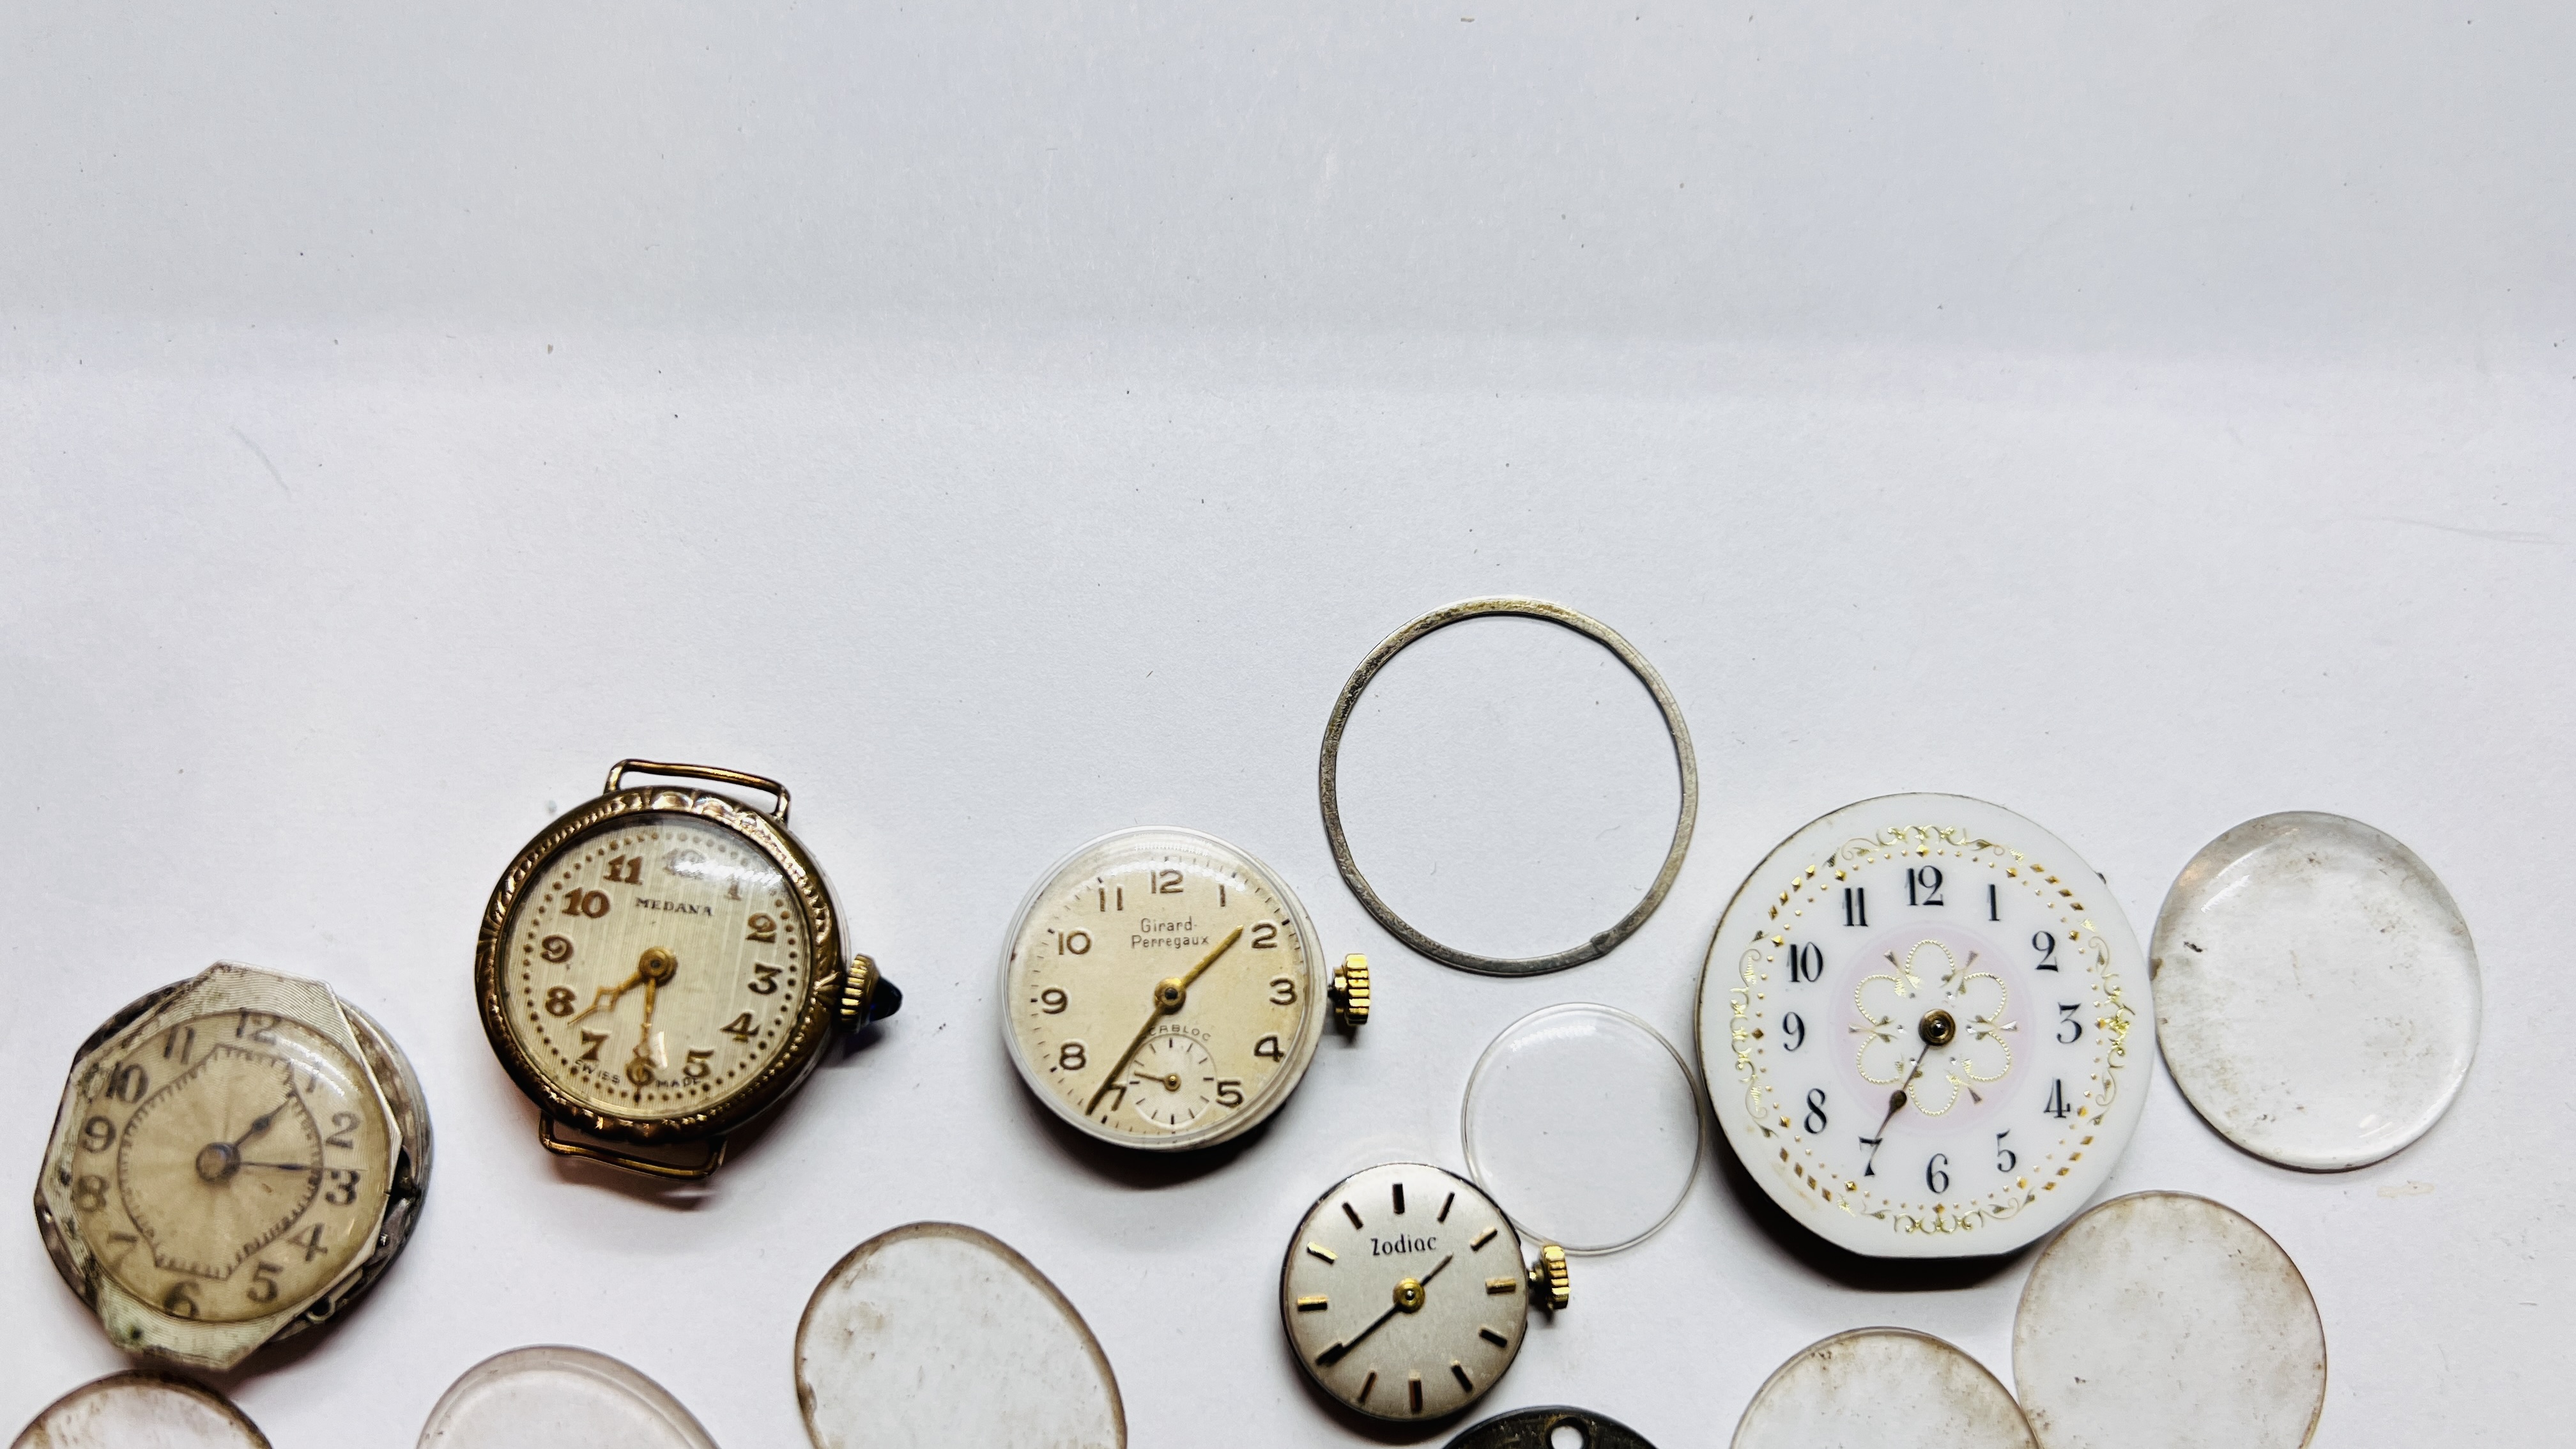 A GROUP OF VINTAGE WATCH FACES AND GLASSES TO INCLUDE ENAMELED AND EXAMPLES MARKED MEDANA, - Image 4 of 9